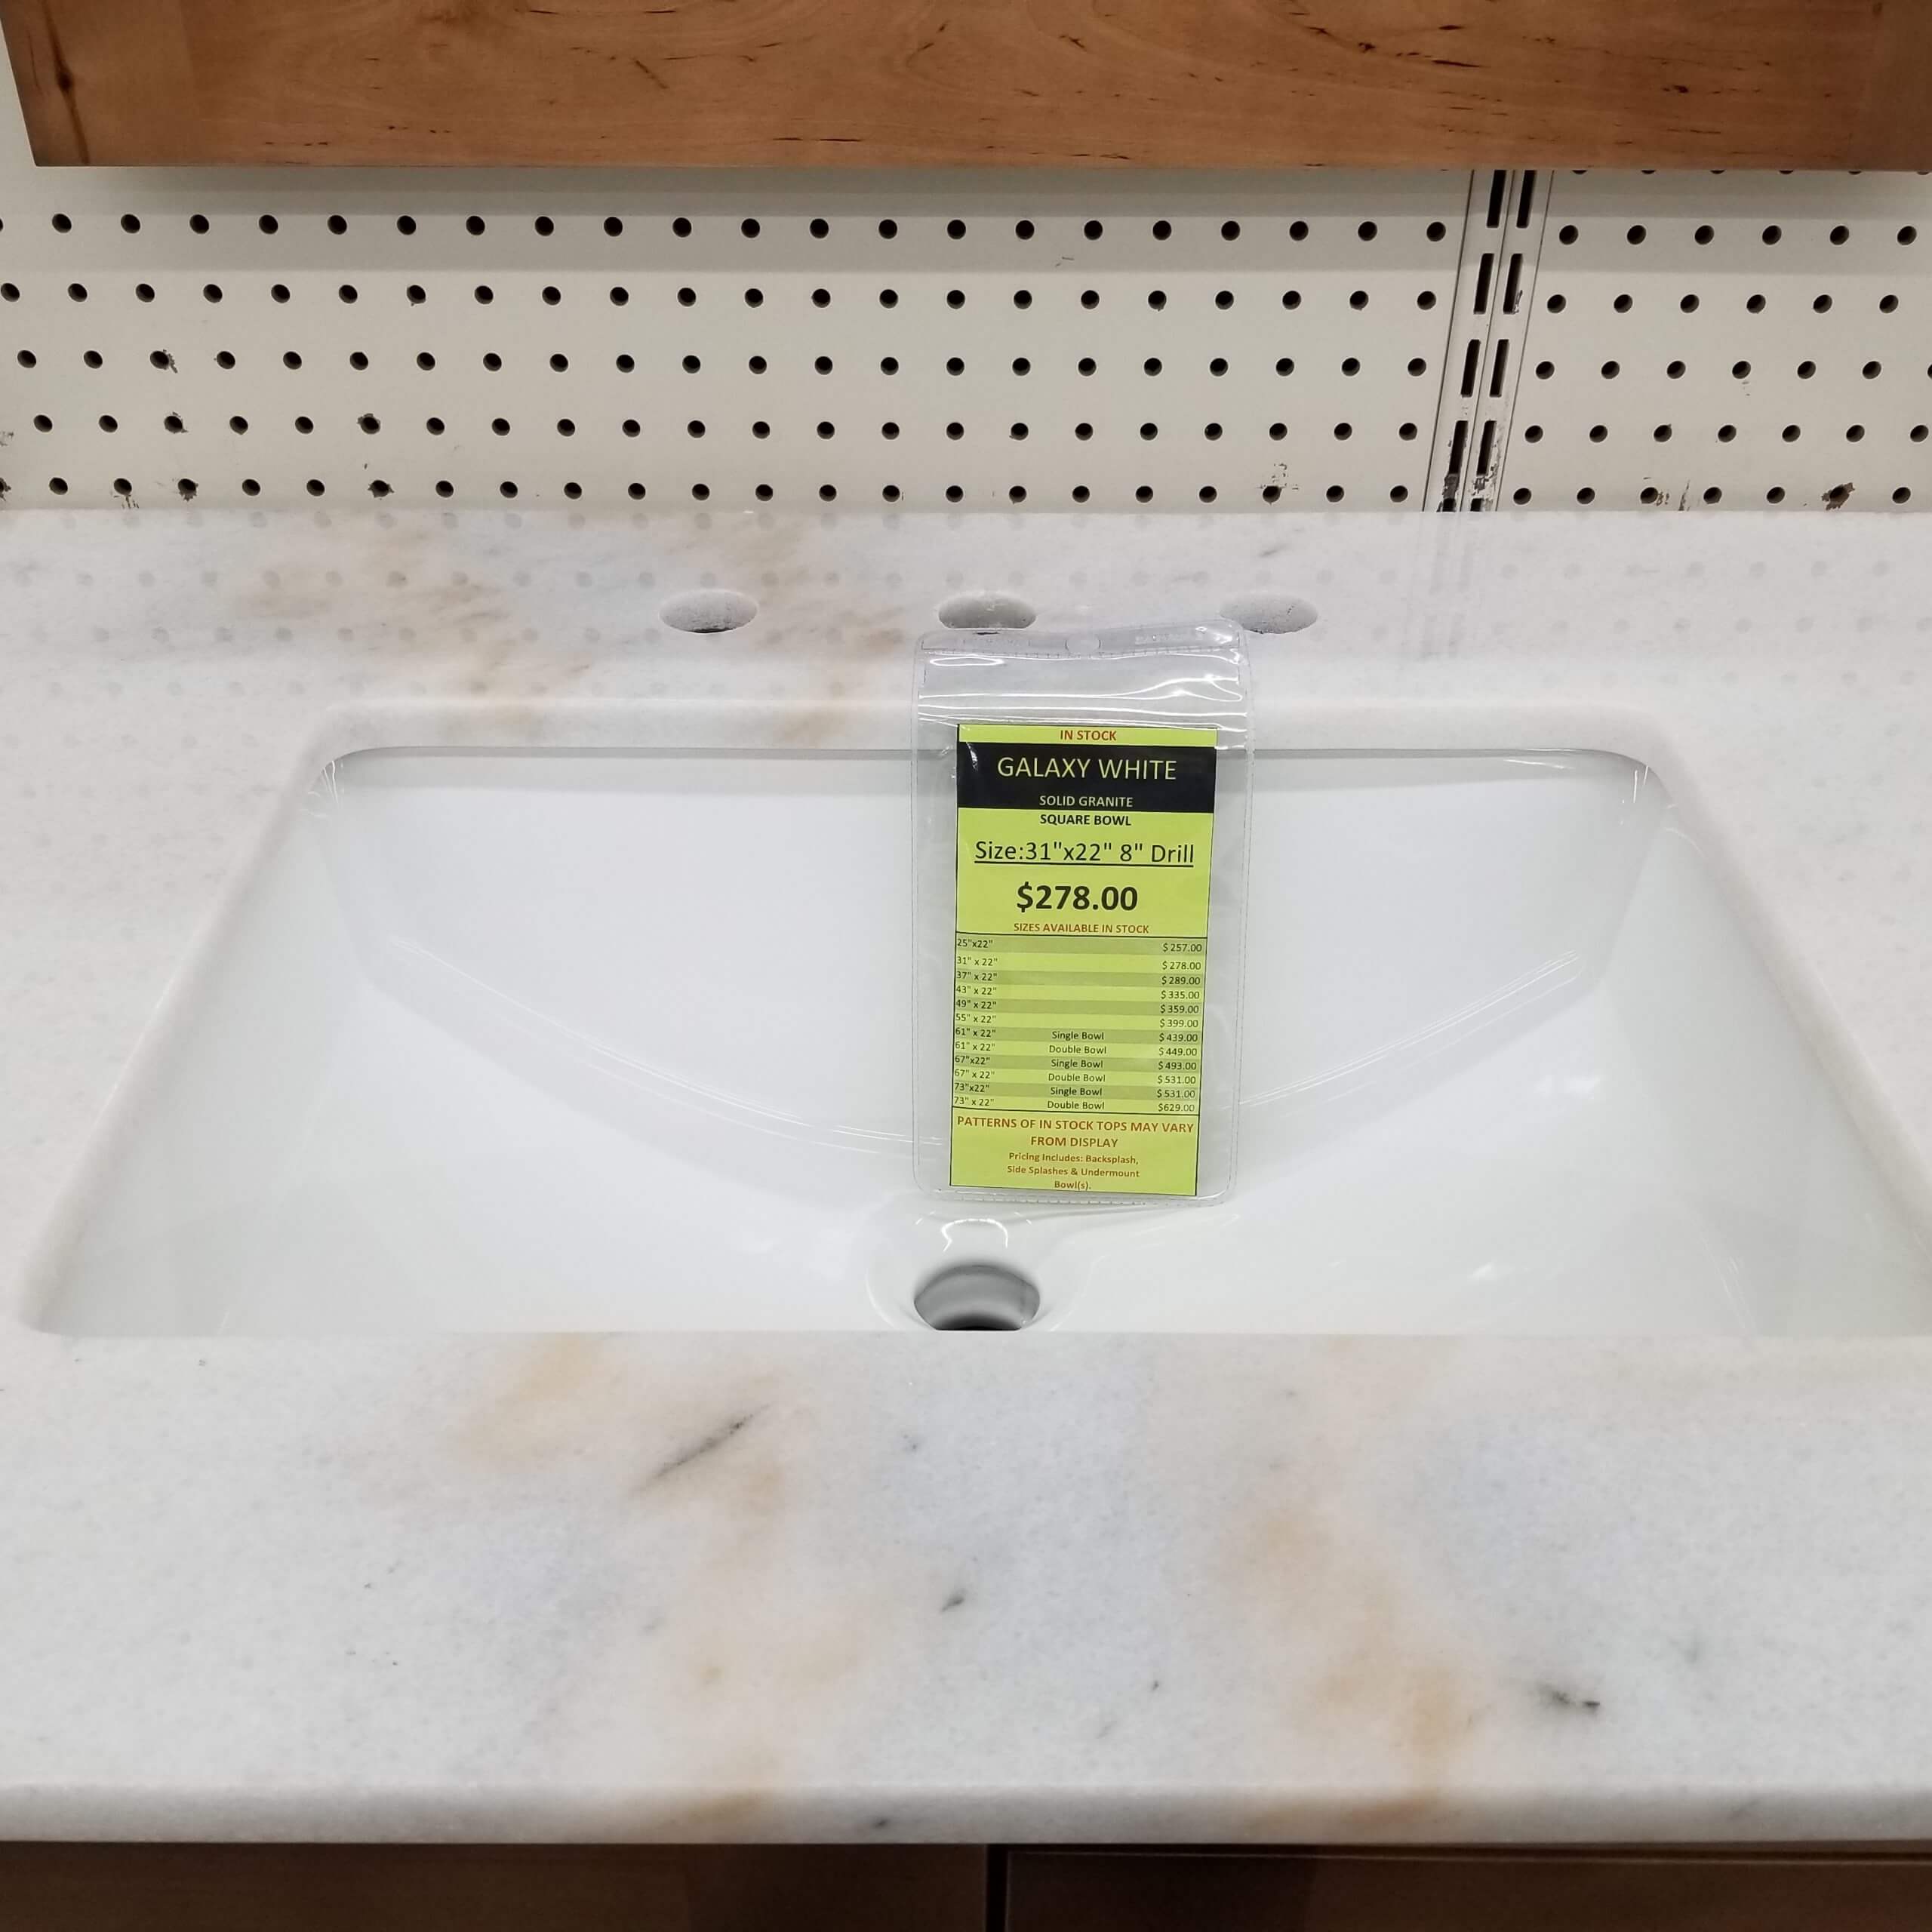 Galaxy White Marble 8 Drill Vanity Top